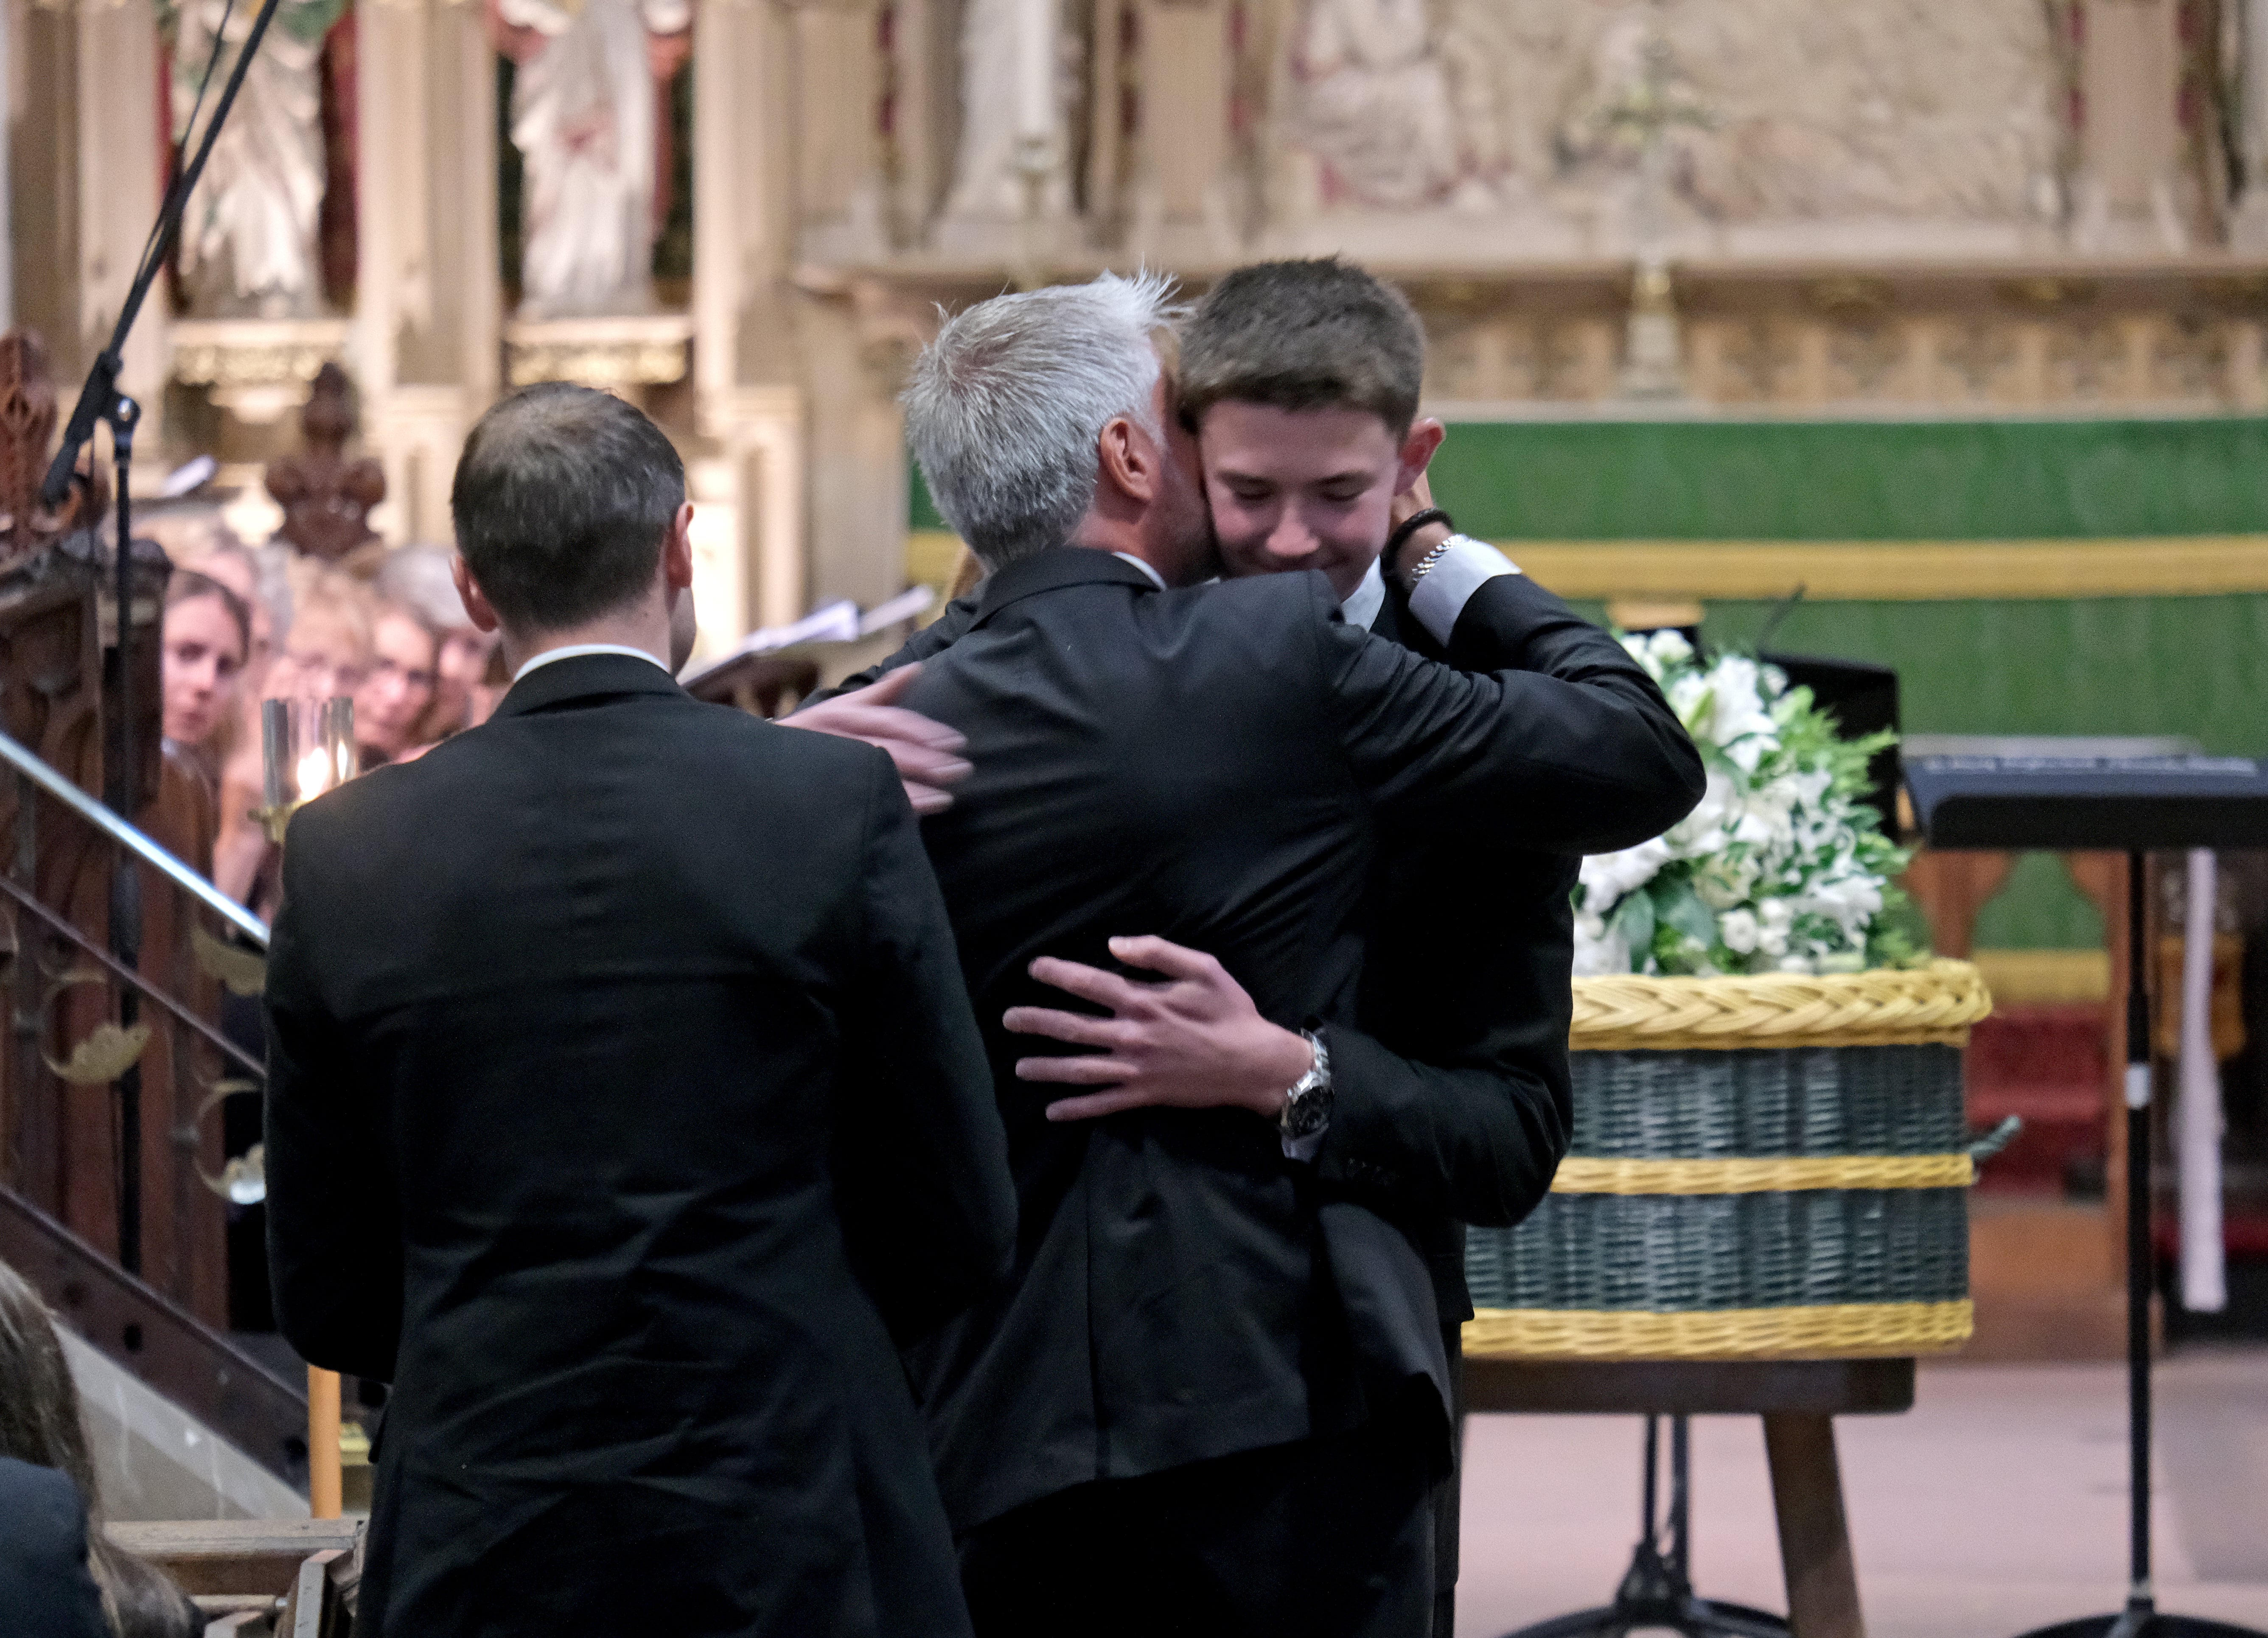 His brother was embraced by his father David after his touching tribute